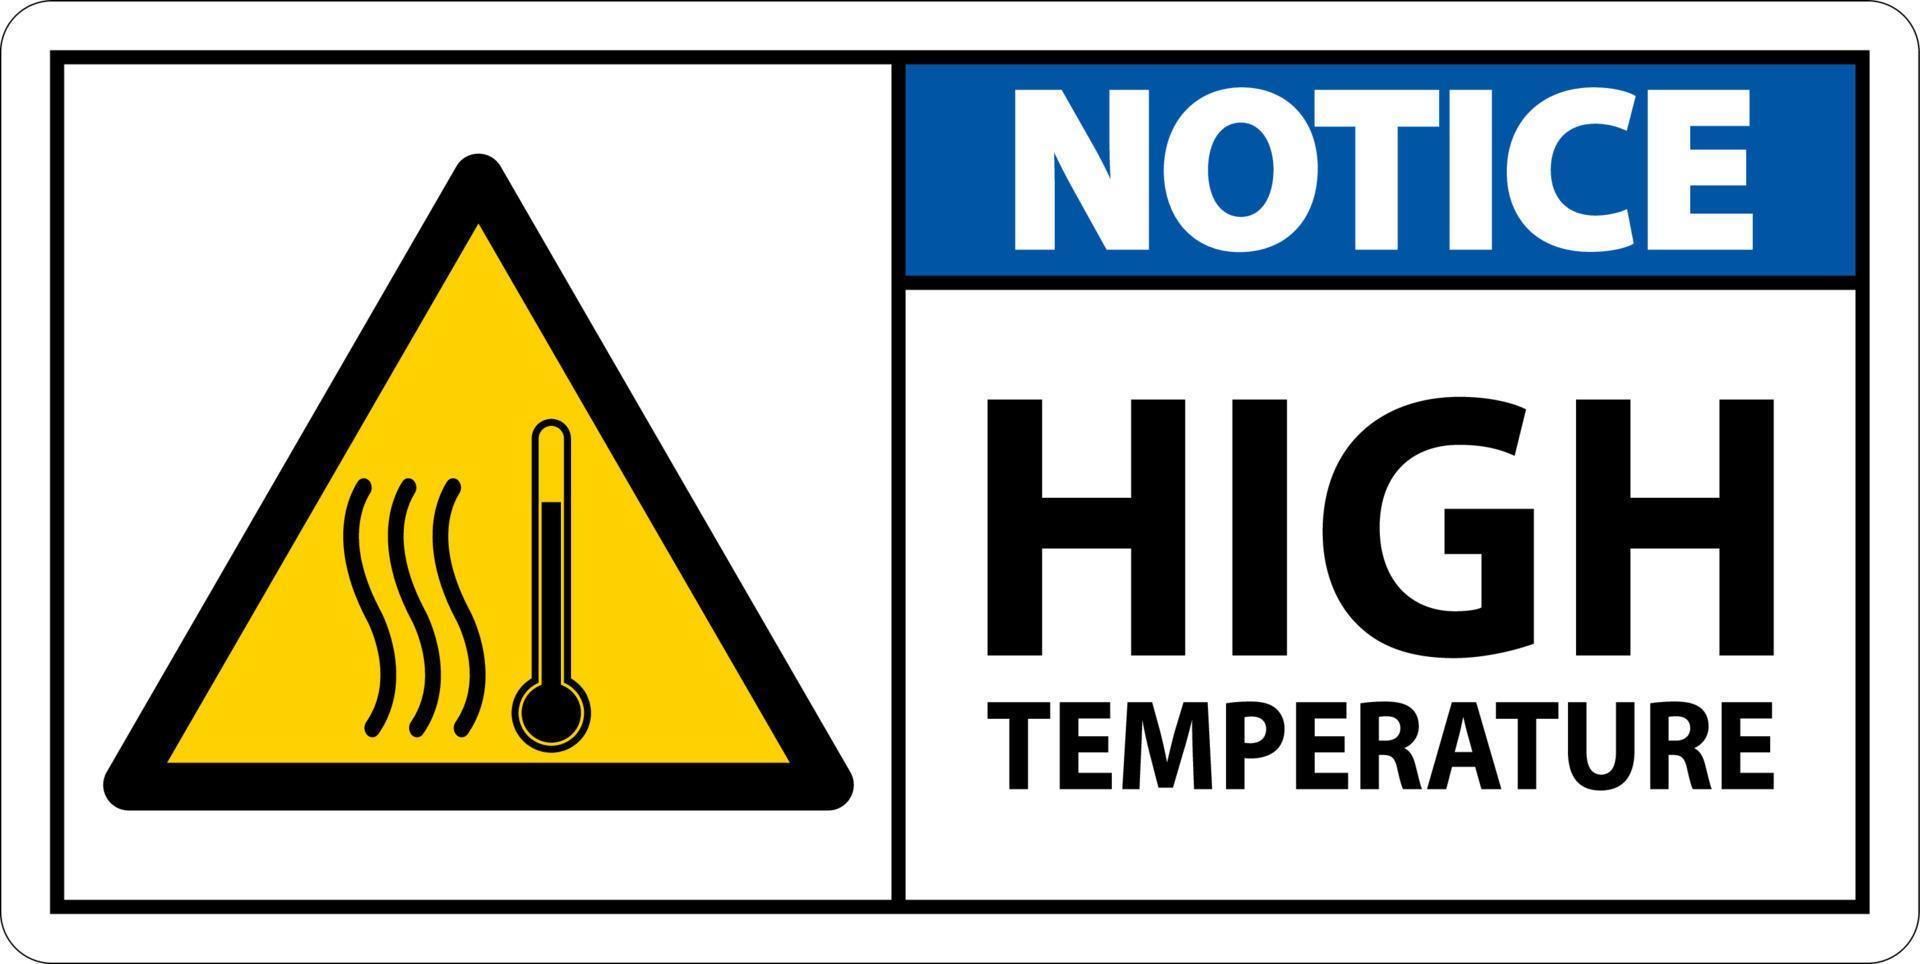 Notice High temperature symbol and text safety sign. vector